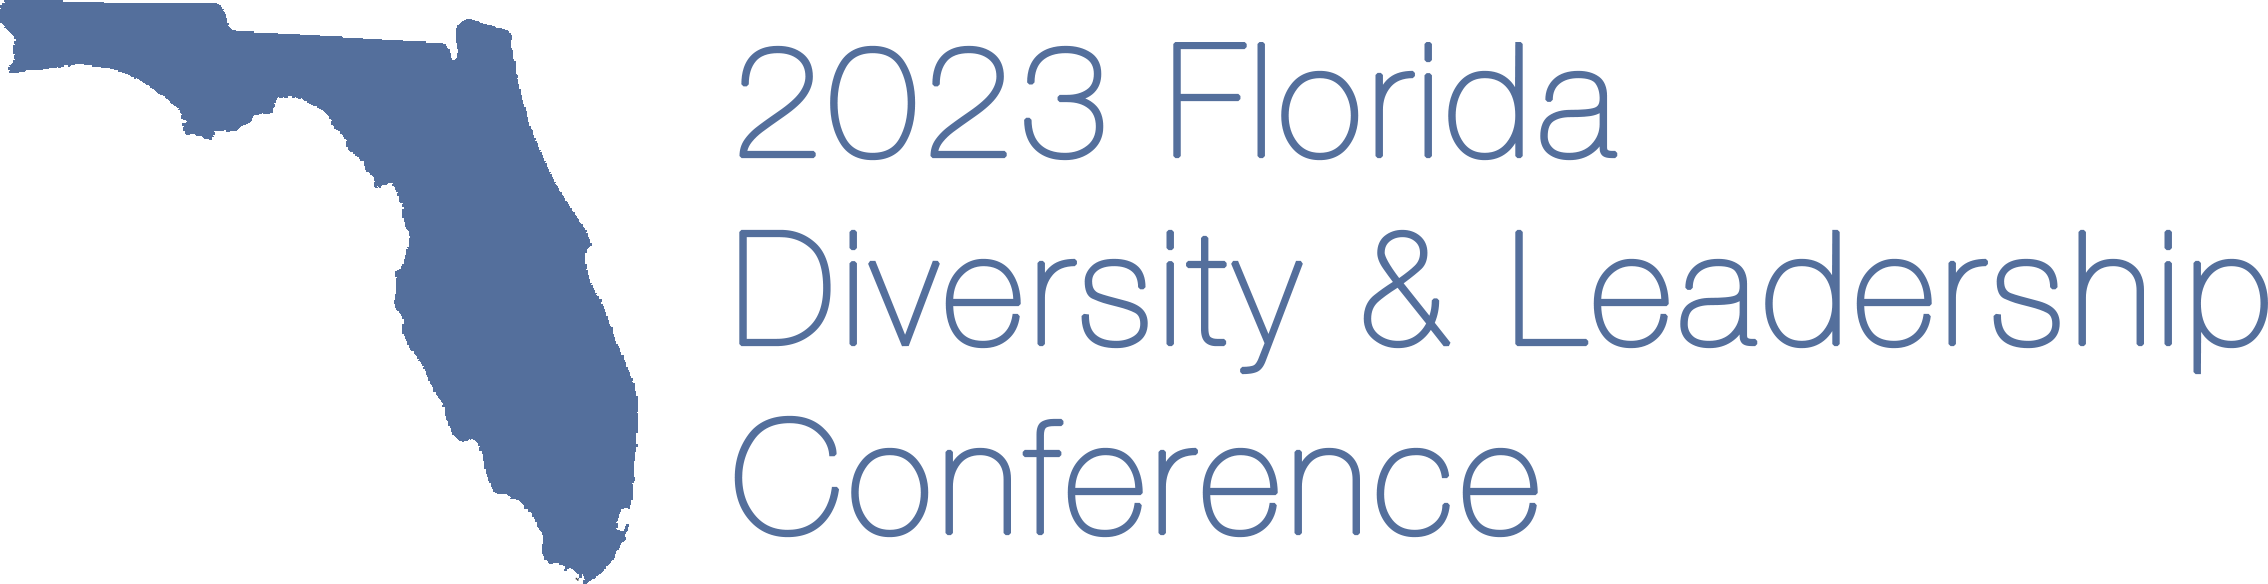 2023 10th Annual Florida Diversity & Leadership Conference